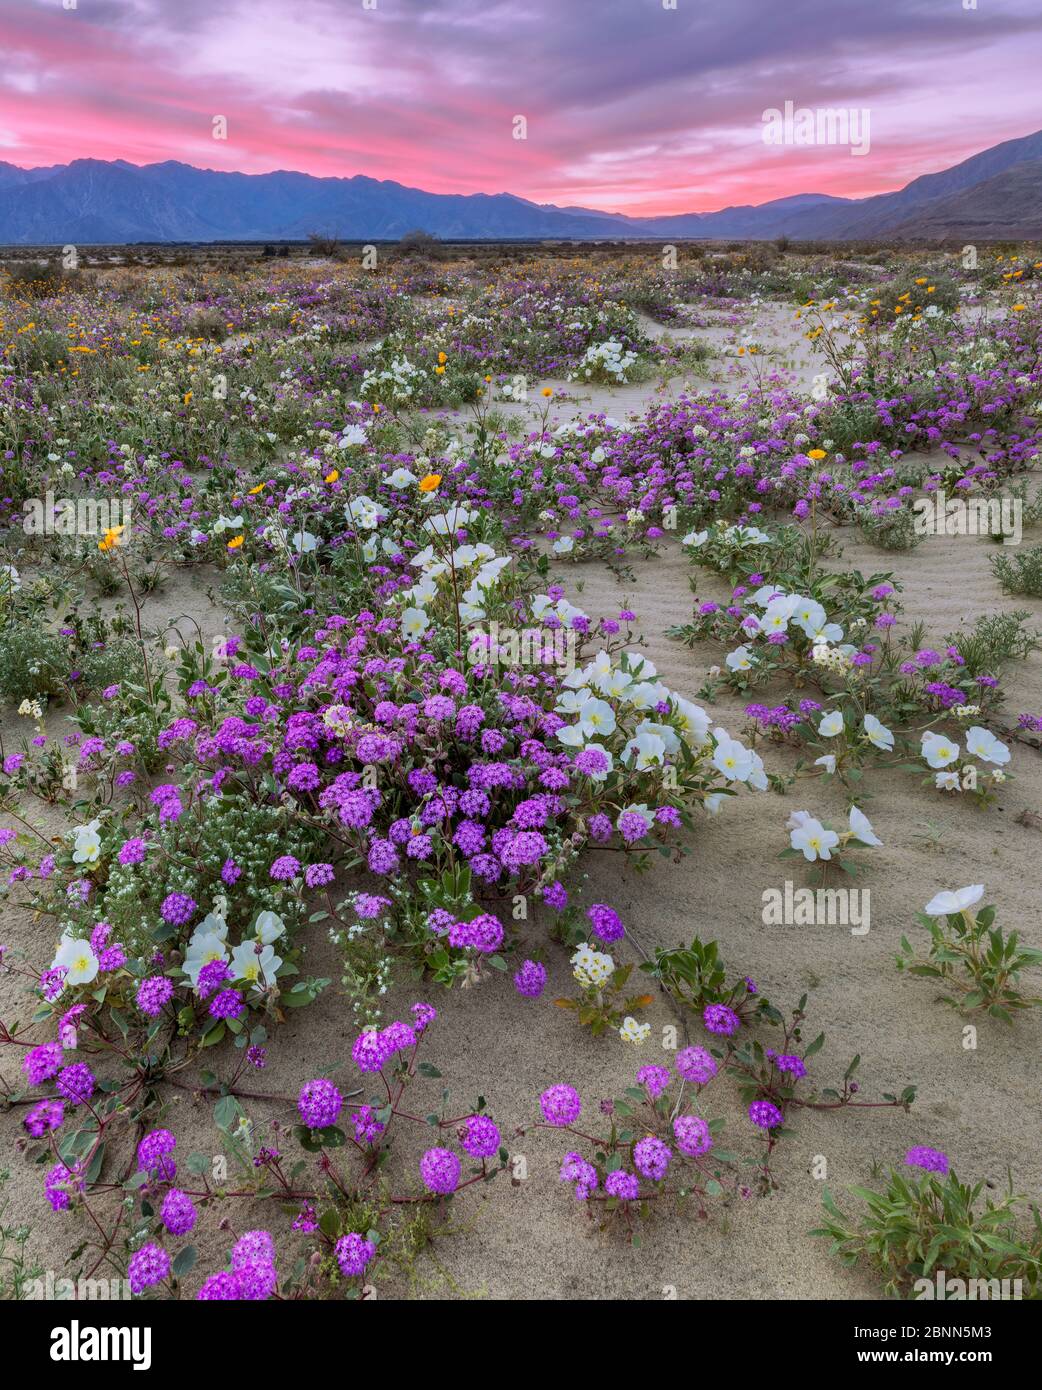 Desert landscape at sunset, with flowering Sand verbena (Abronia), Desert gold (Geraea canescens), and Birdcage evening primrose (Oenothera deltoides) Stock Photo